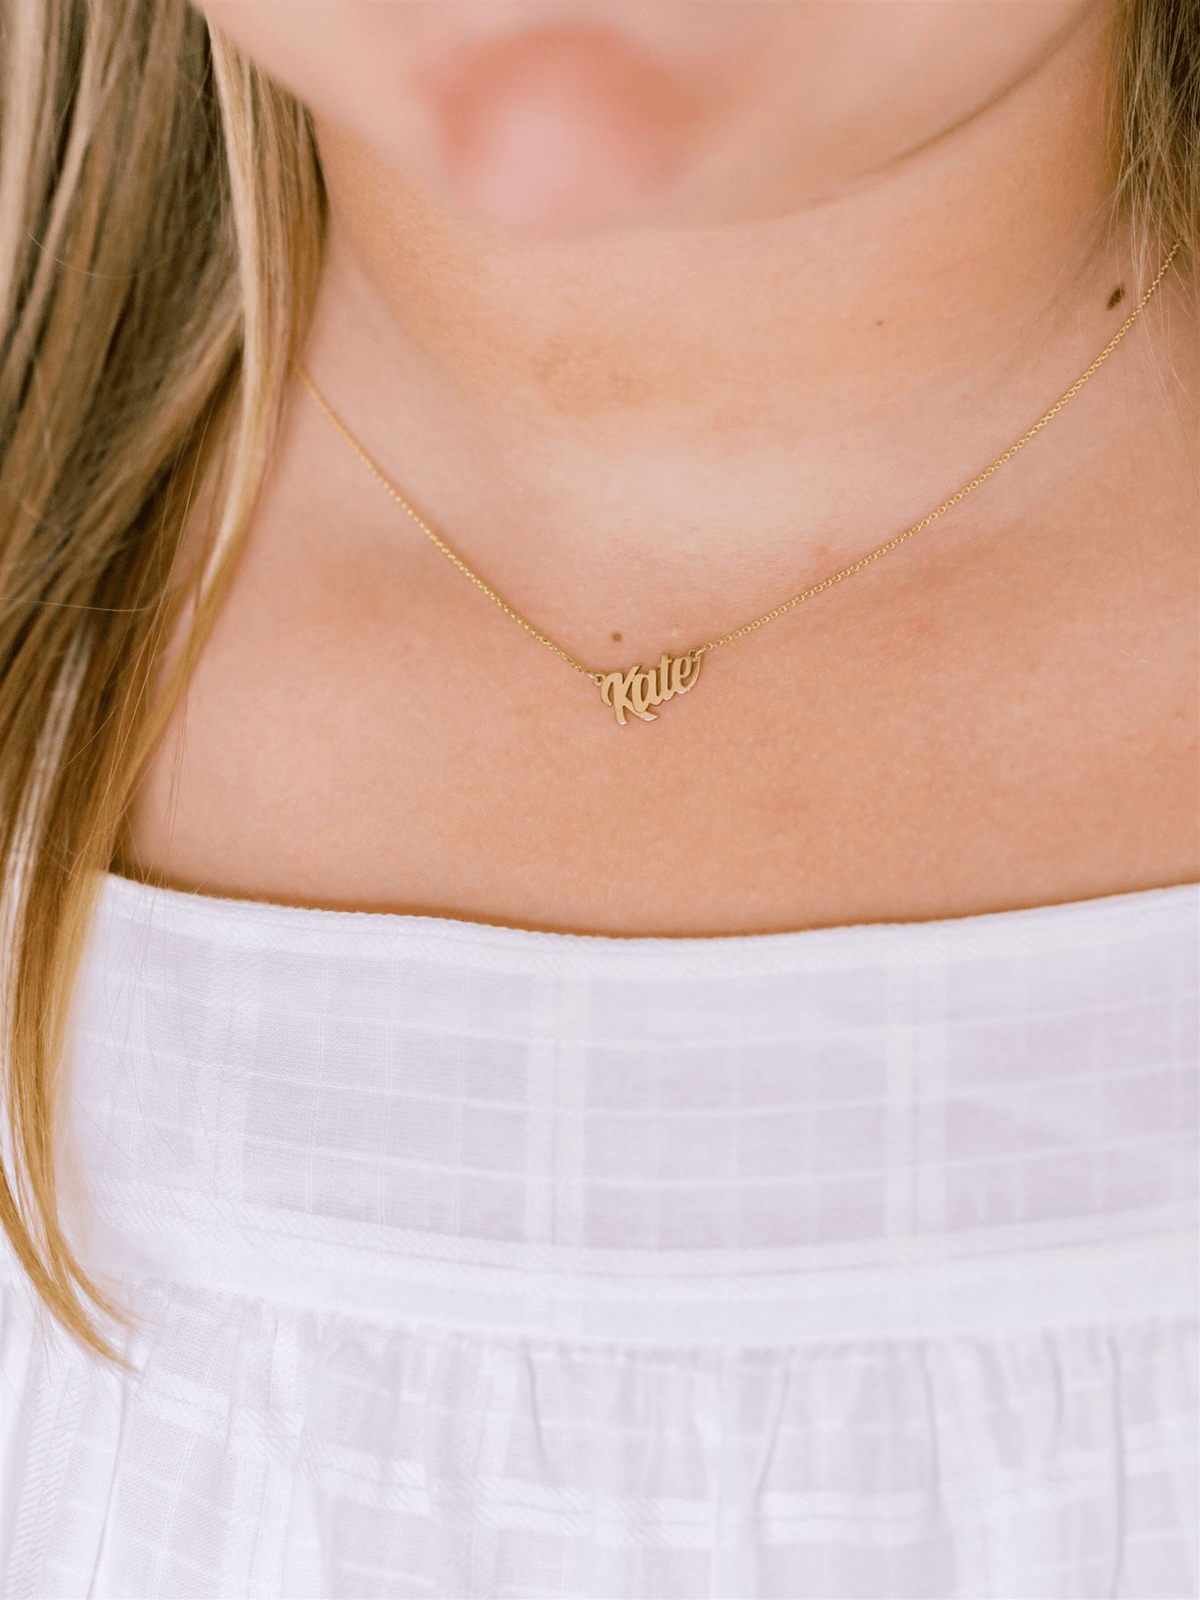 Childrens name necklace gold